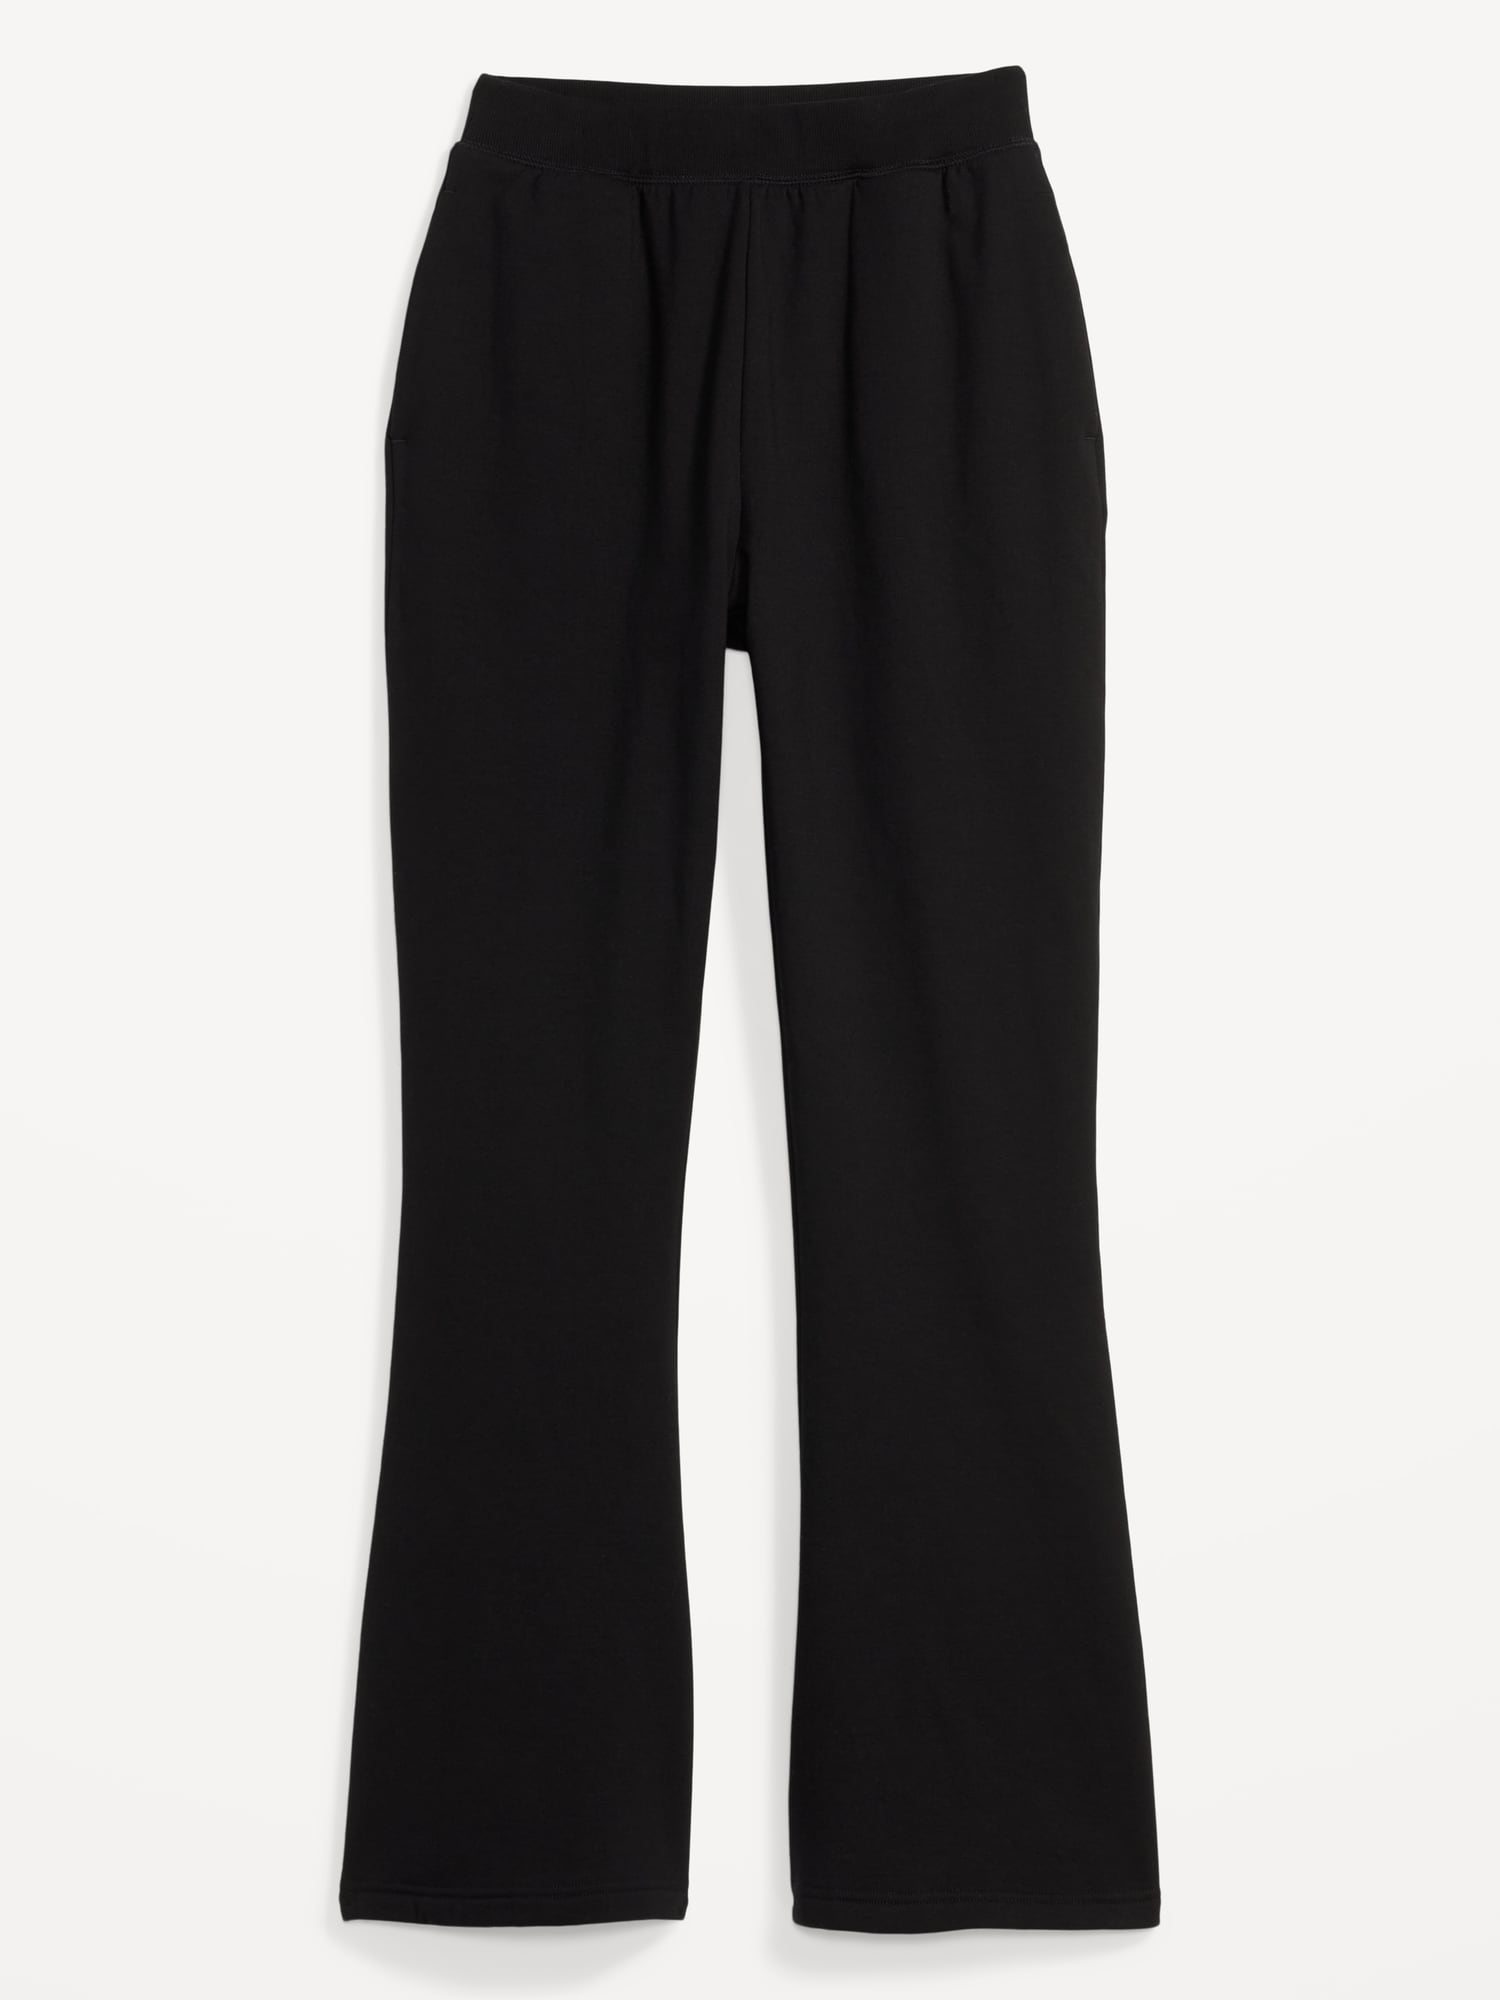 Extra High-Waisted Snuggly Fleece Flare Sweatpants for Women | Old Navy